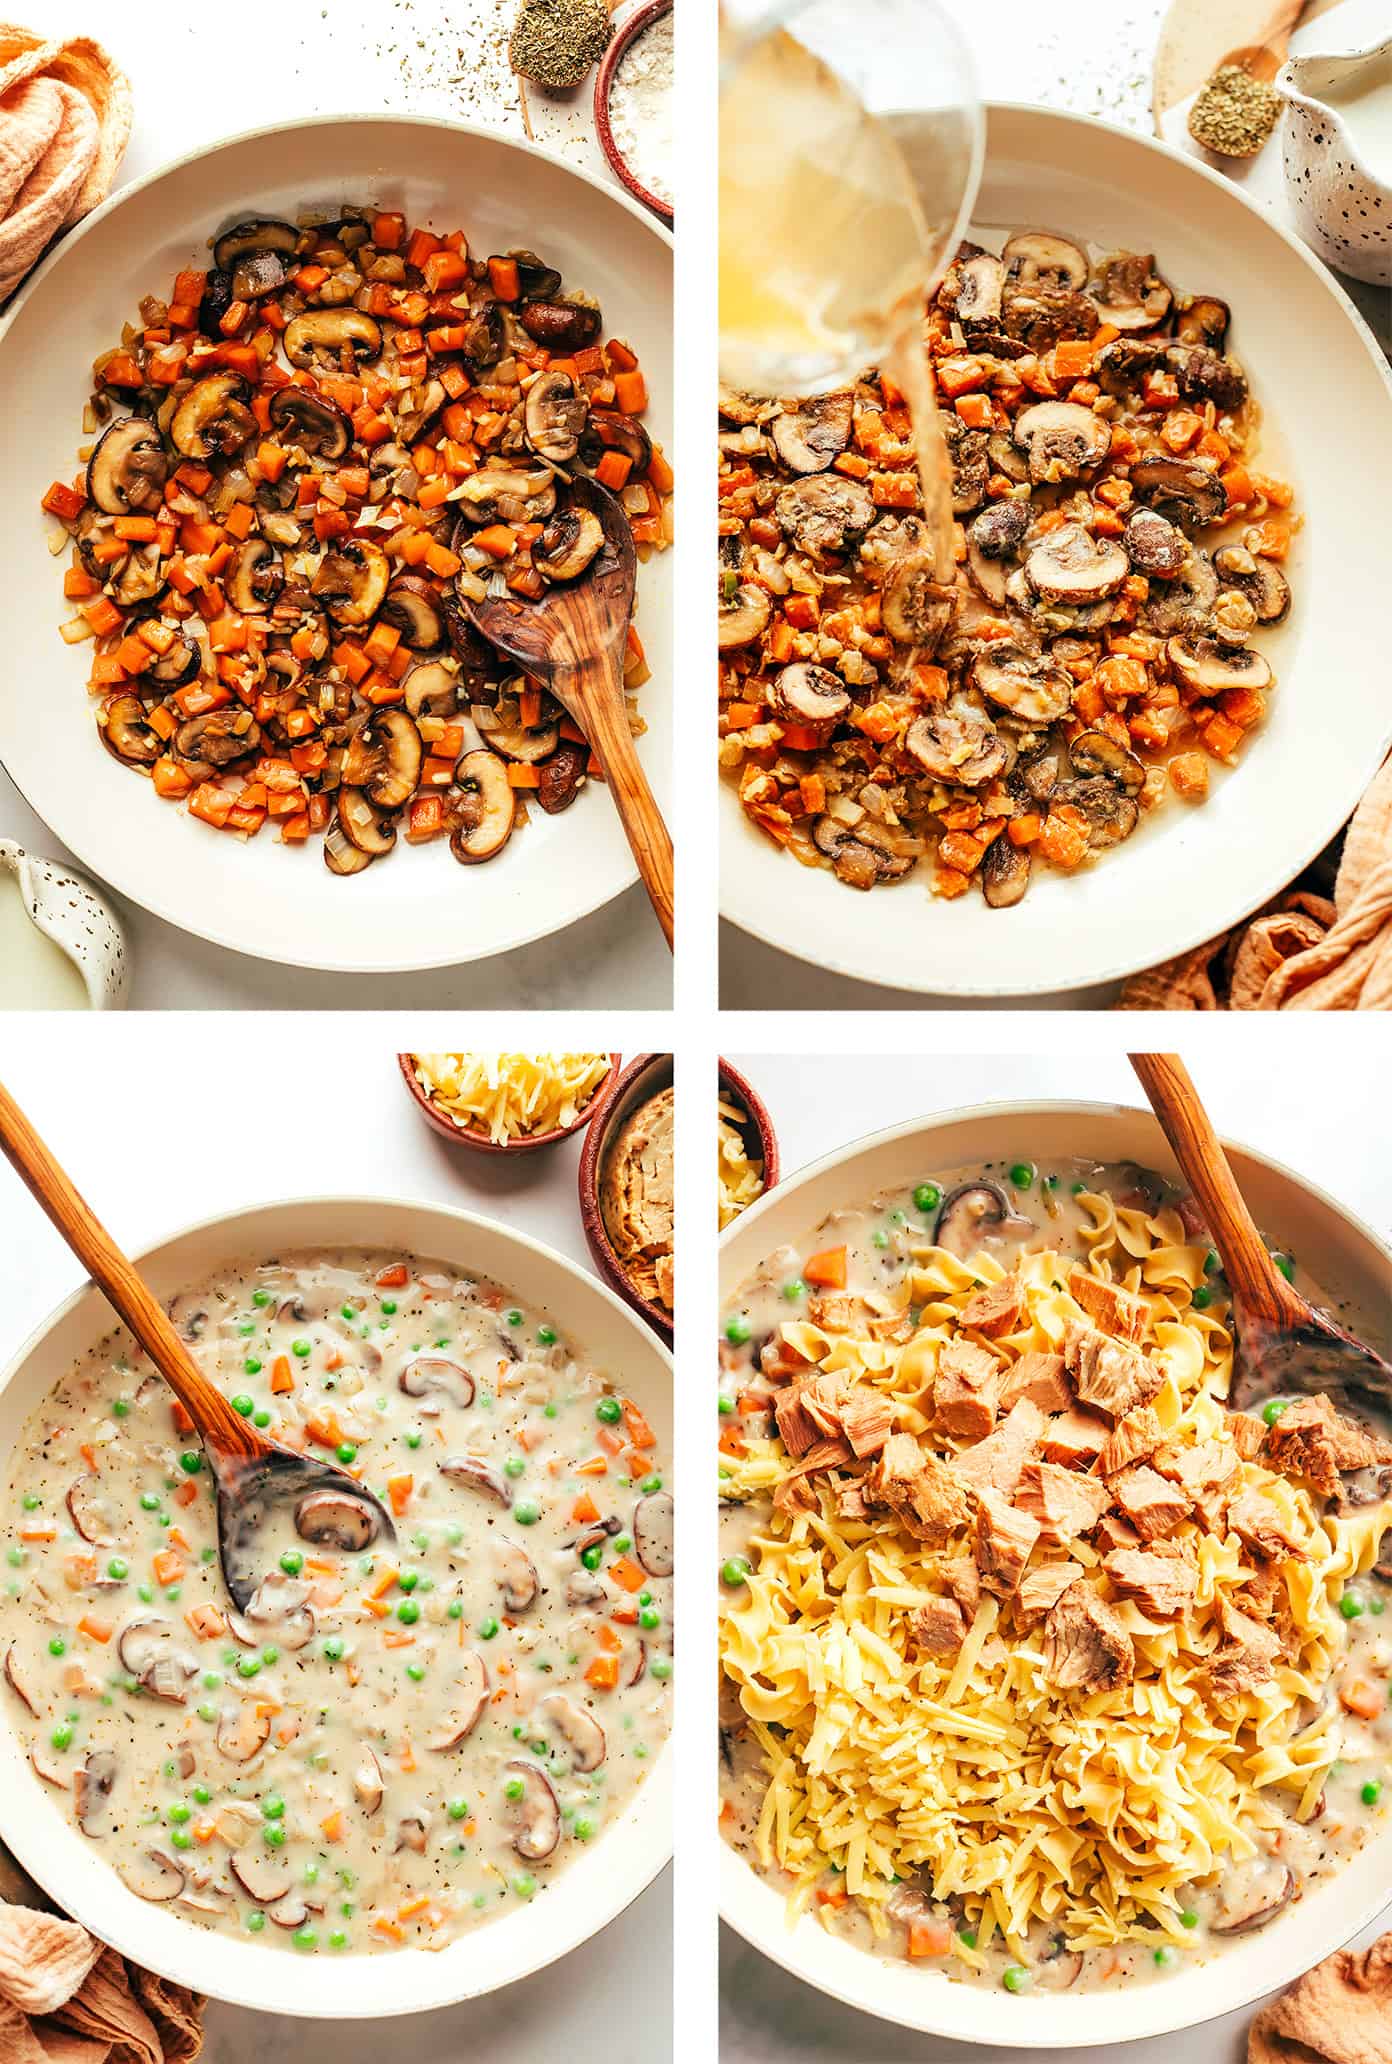 Step by step photos showing how to make tuna casserole